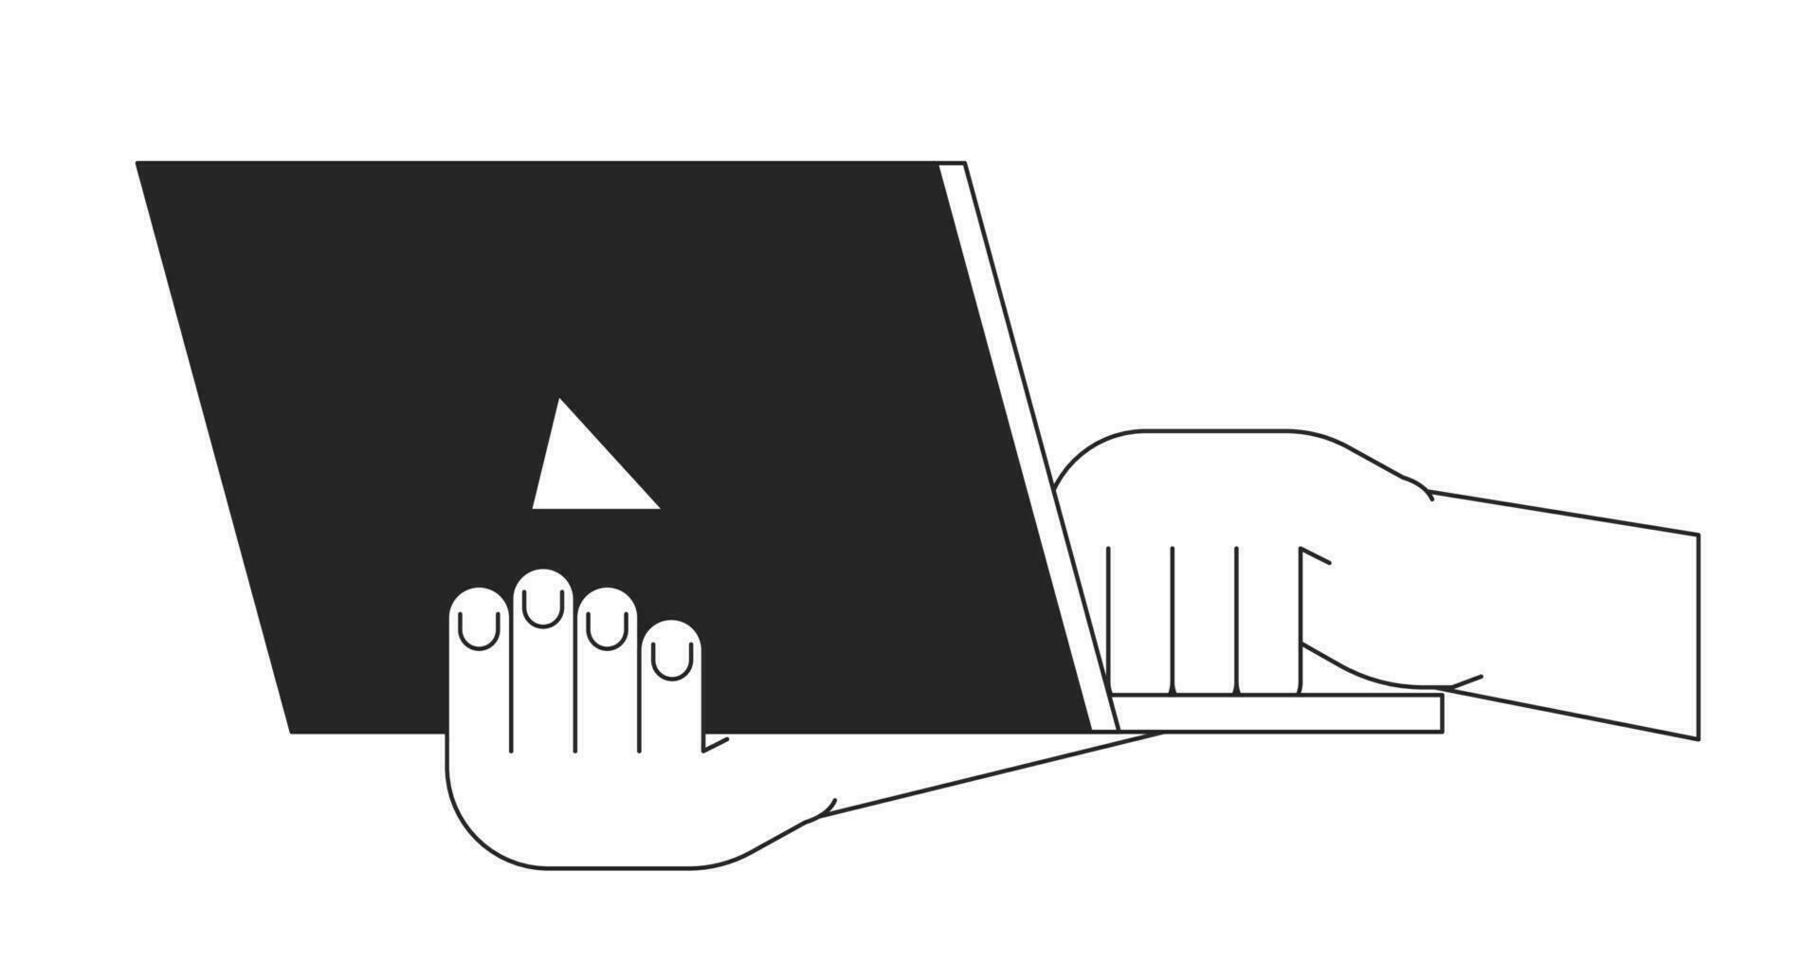 Holding laptop closeup bw vector spot illustration. Typing on keyboard 2D cartoon flat line monochromatic first view hand on white for web UI design. Tech gadget editable isolated outline hero image